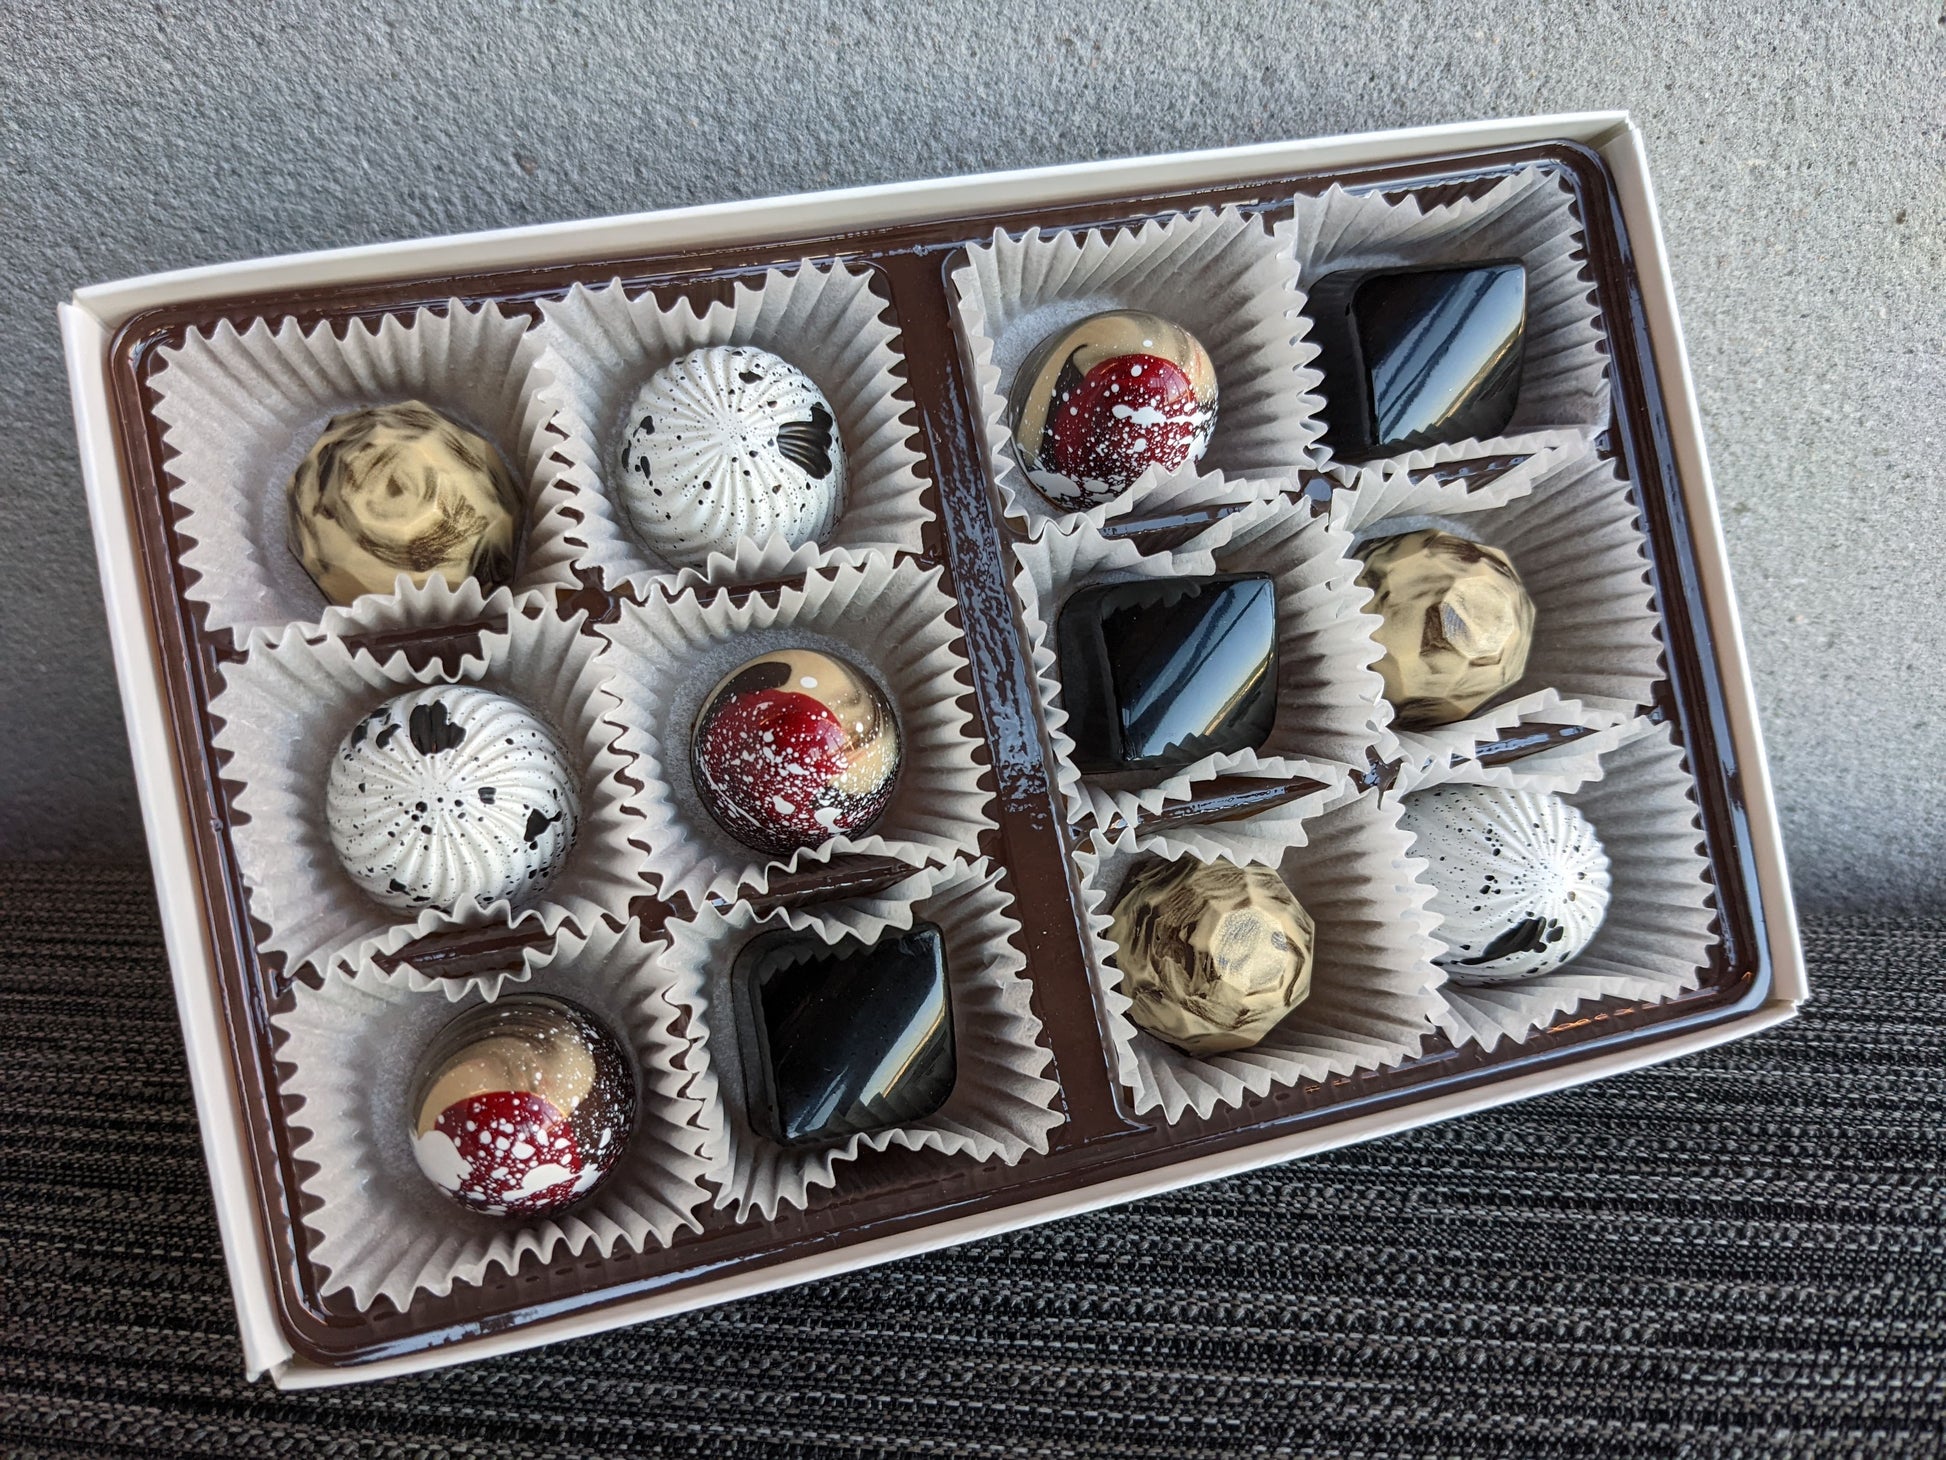 12 piece signature chocolate bonbon collection from Nibbs Chocolates and Desserts